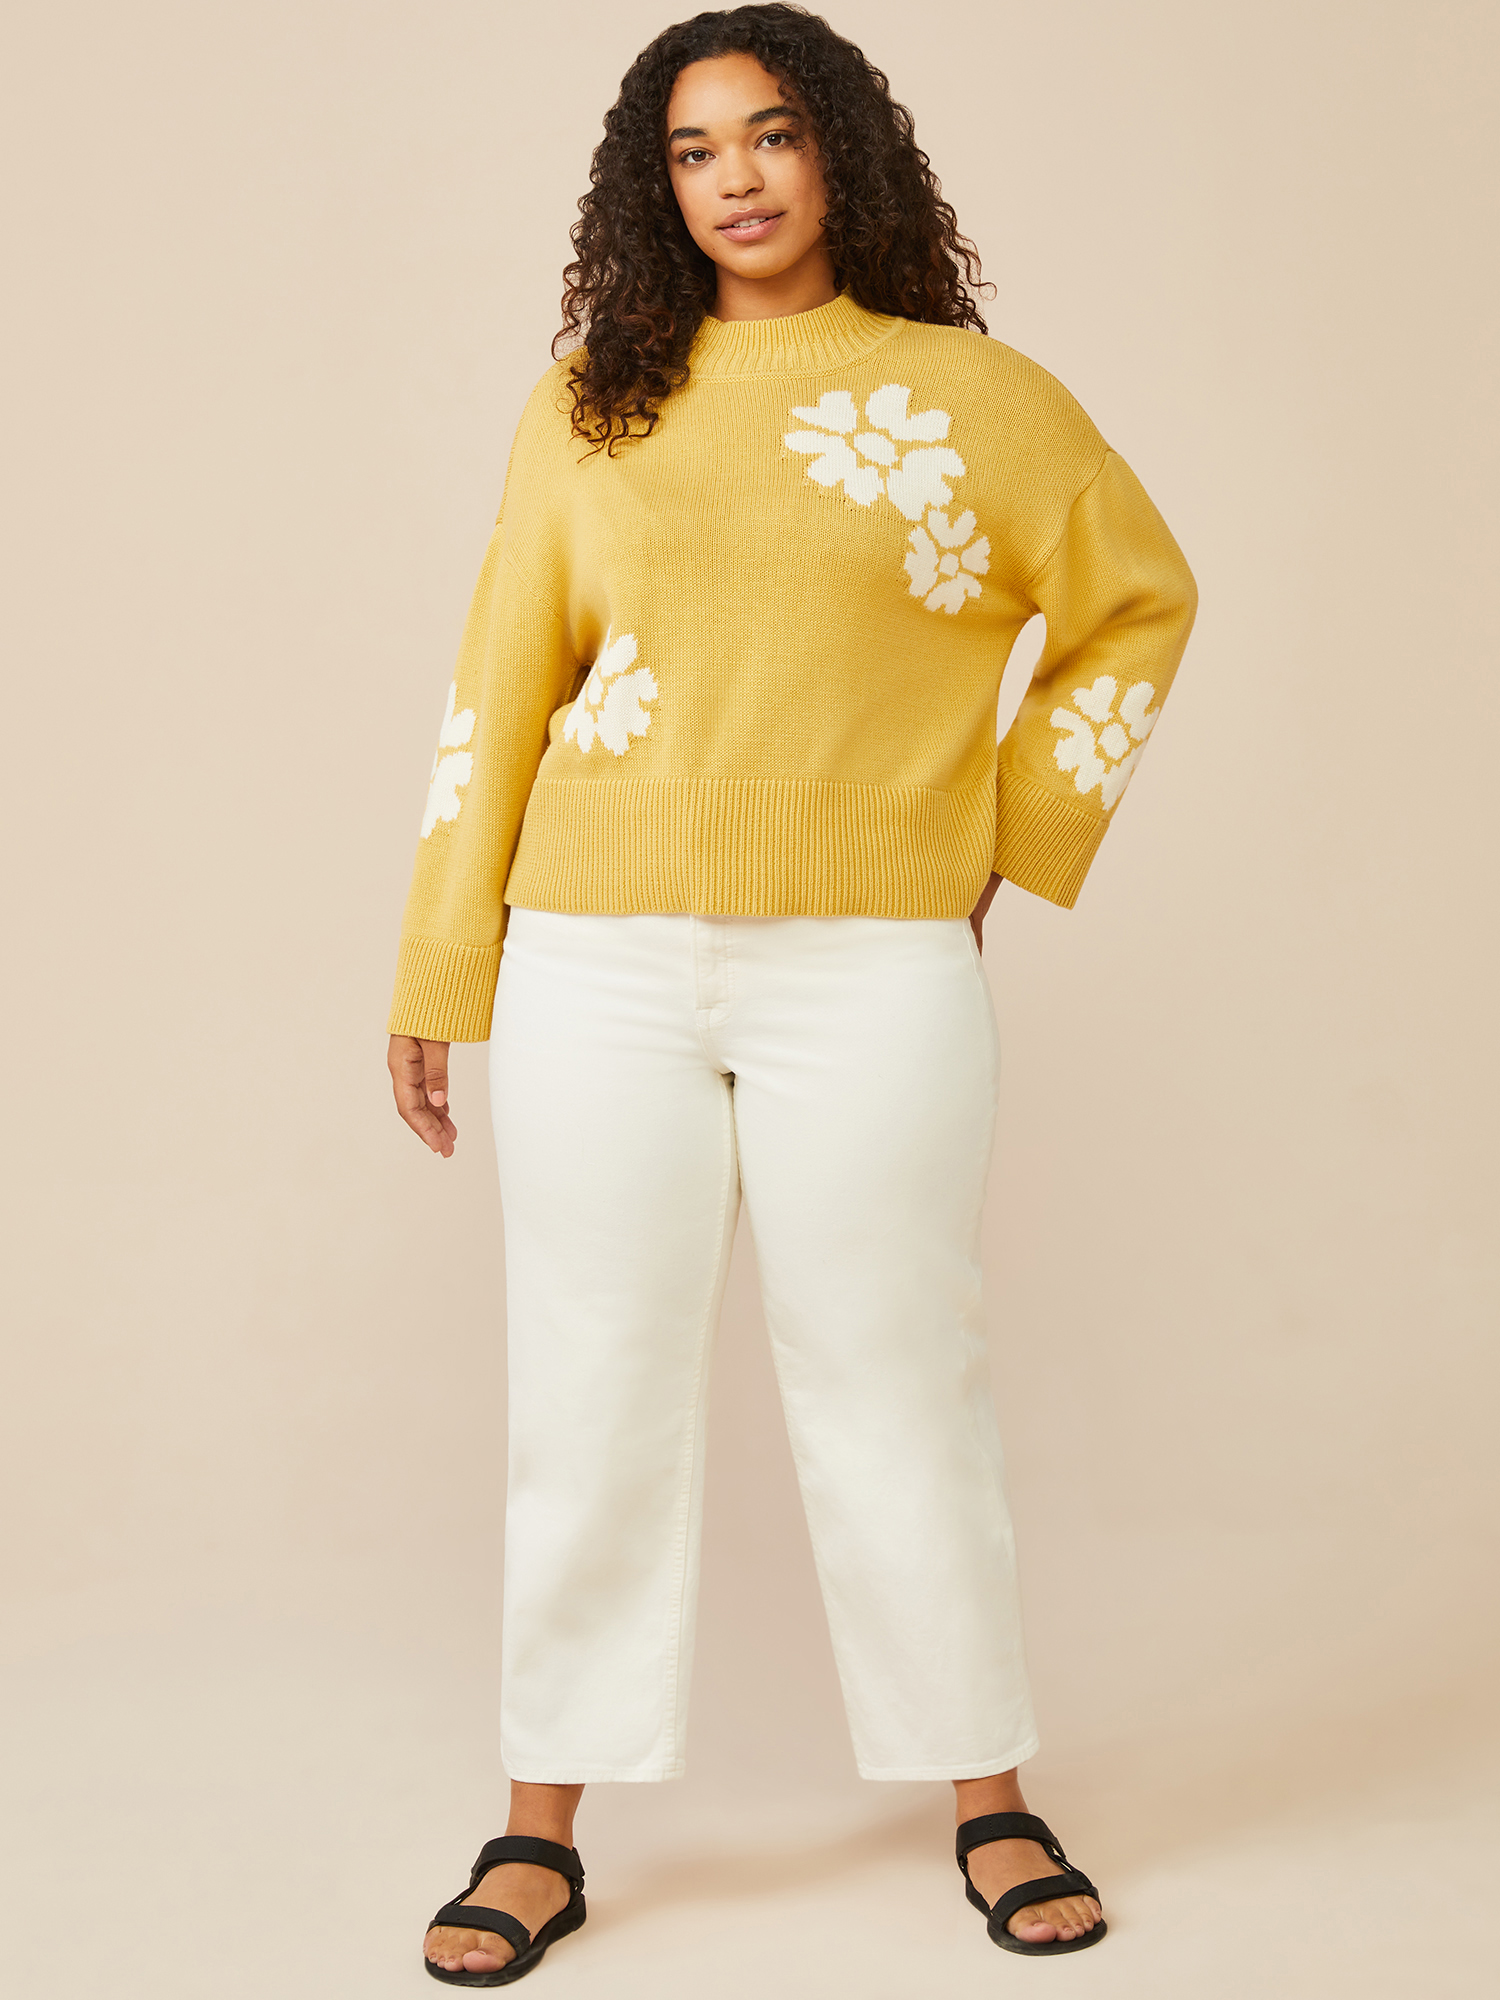 Free Assembly Women’s Mock Neck Sweater with Long Sleeves - image 5 of 8